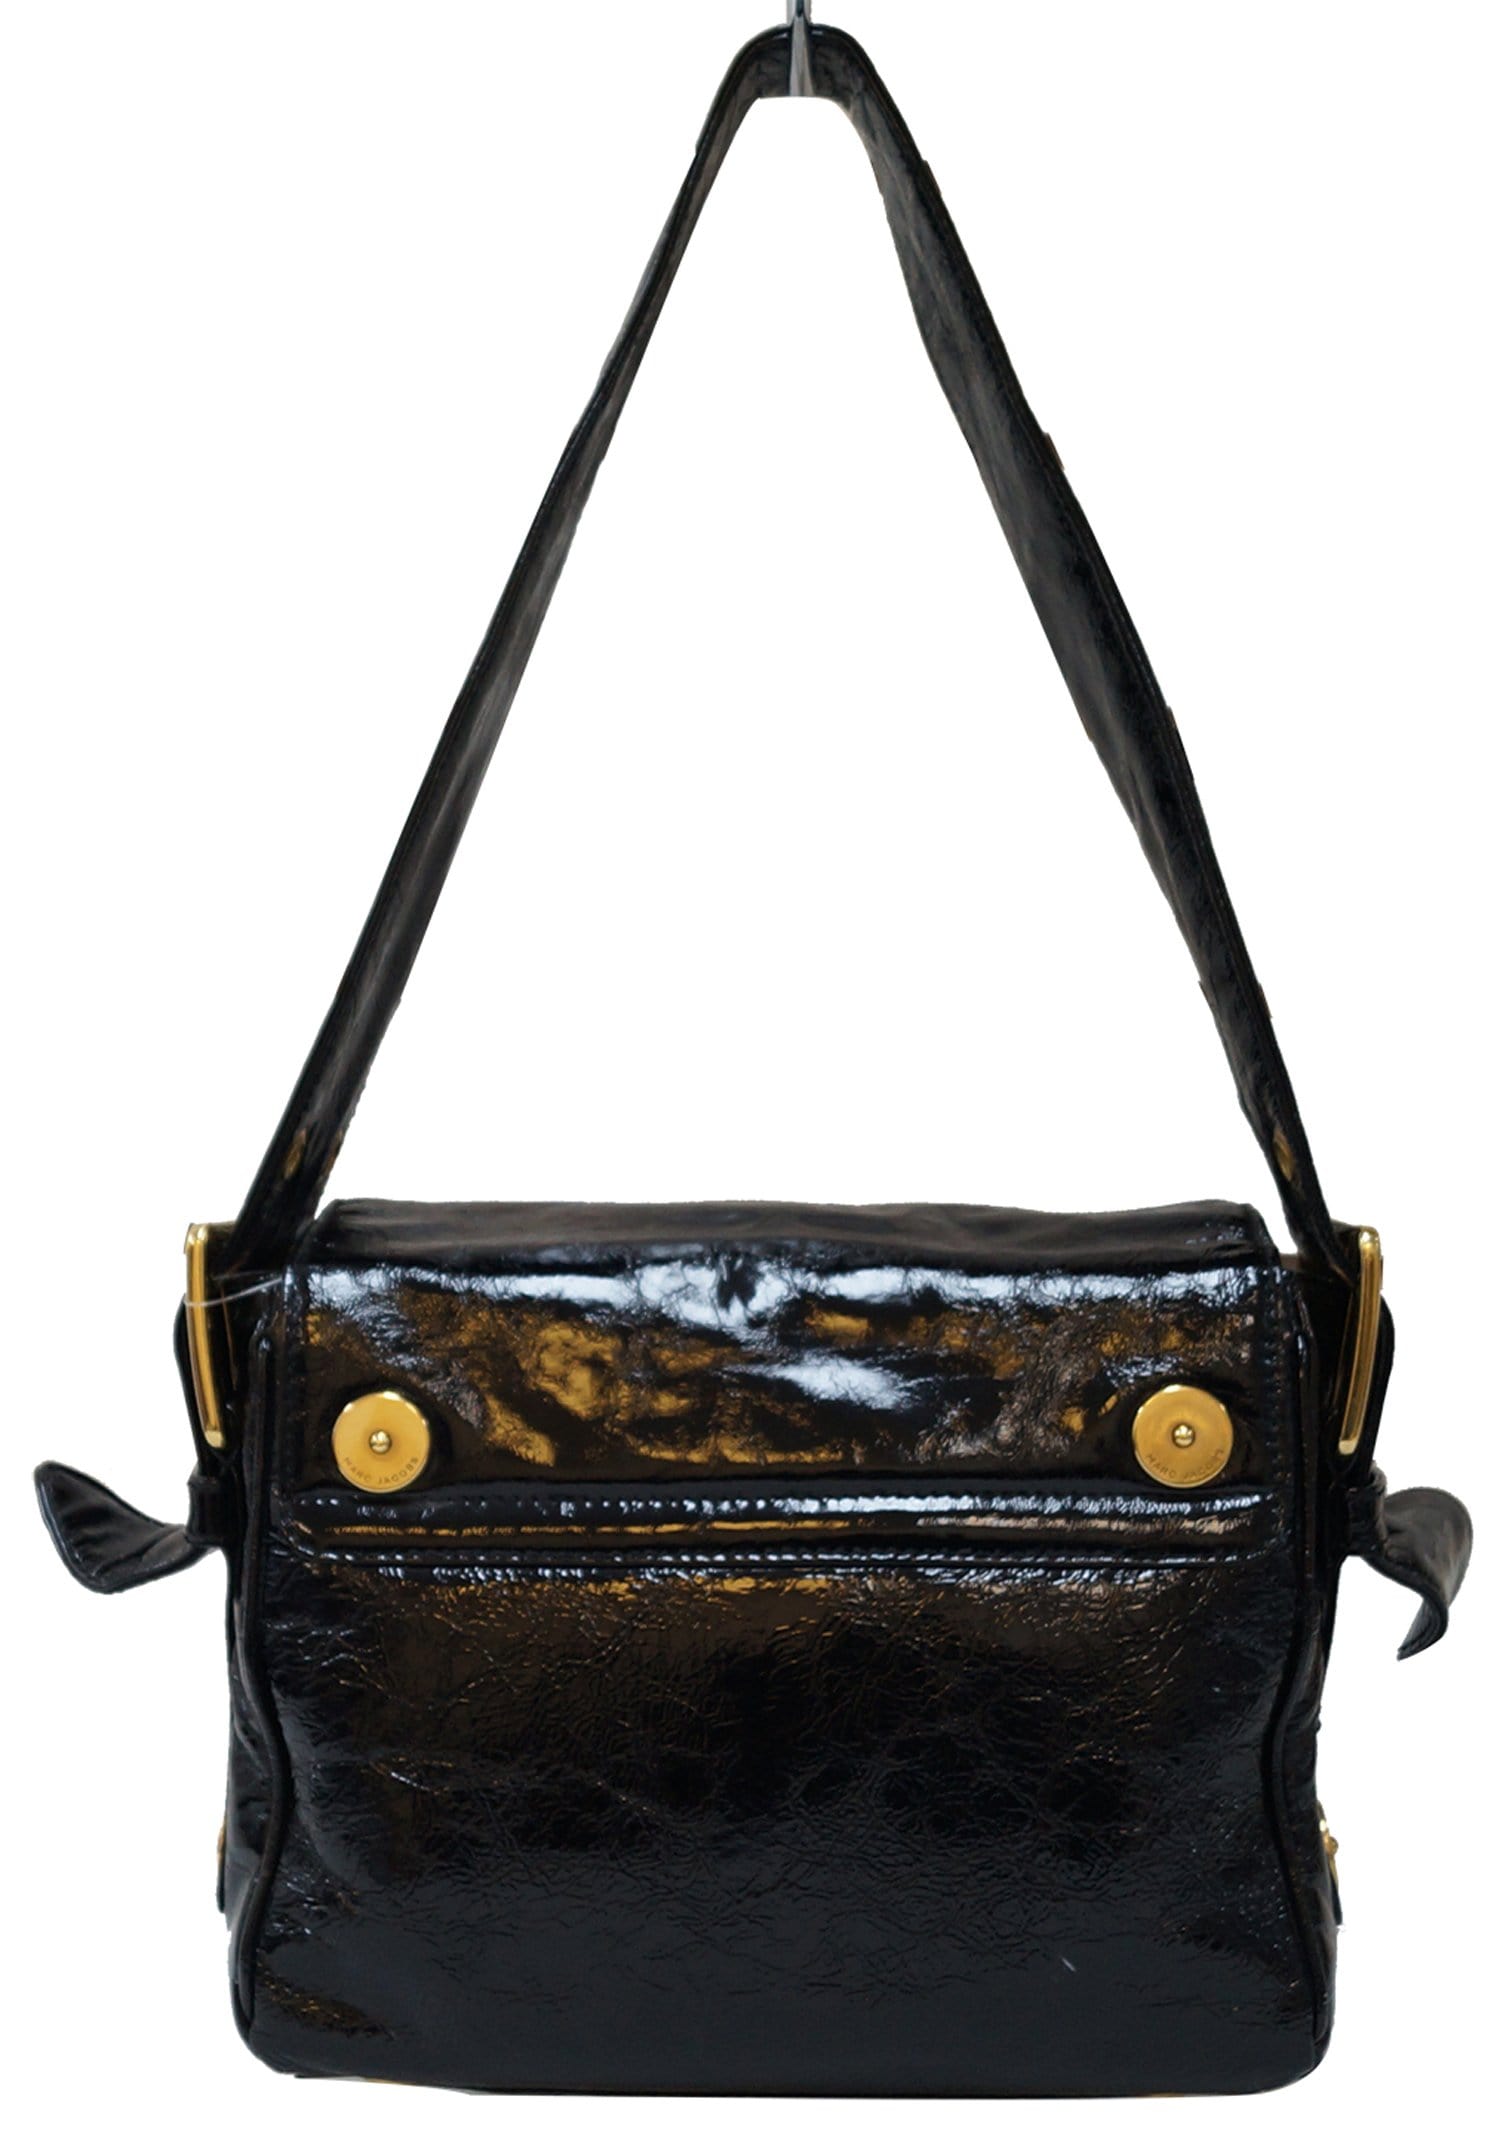 MARC JACOBS Black Leather Clutch with gold hardware